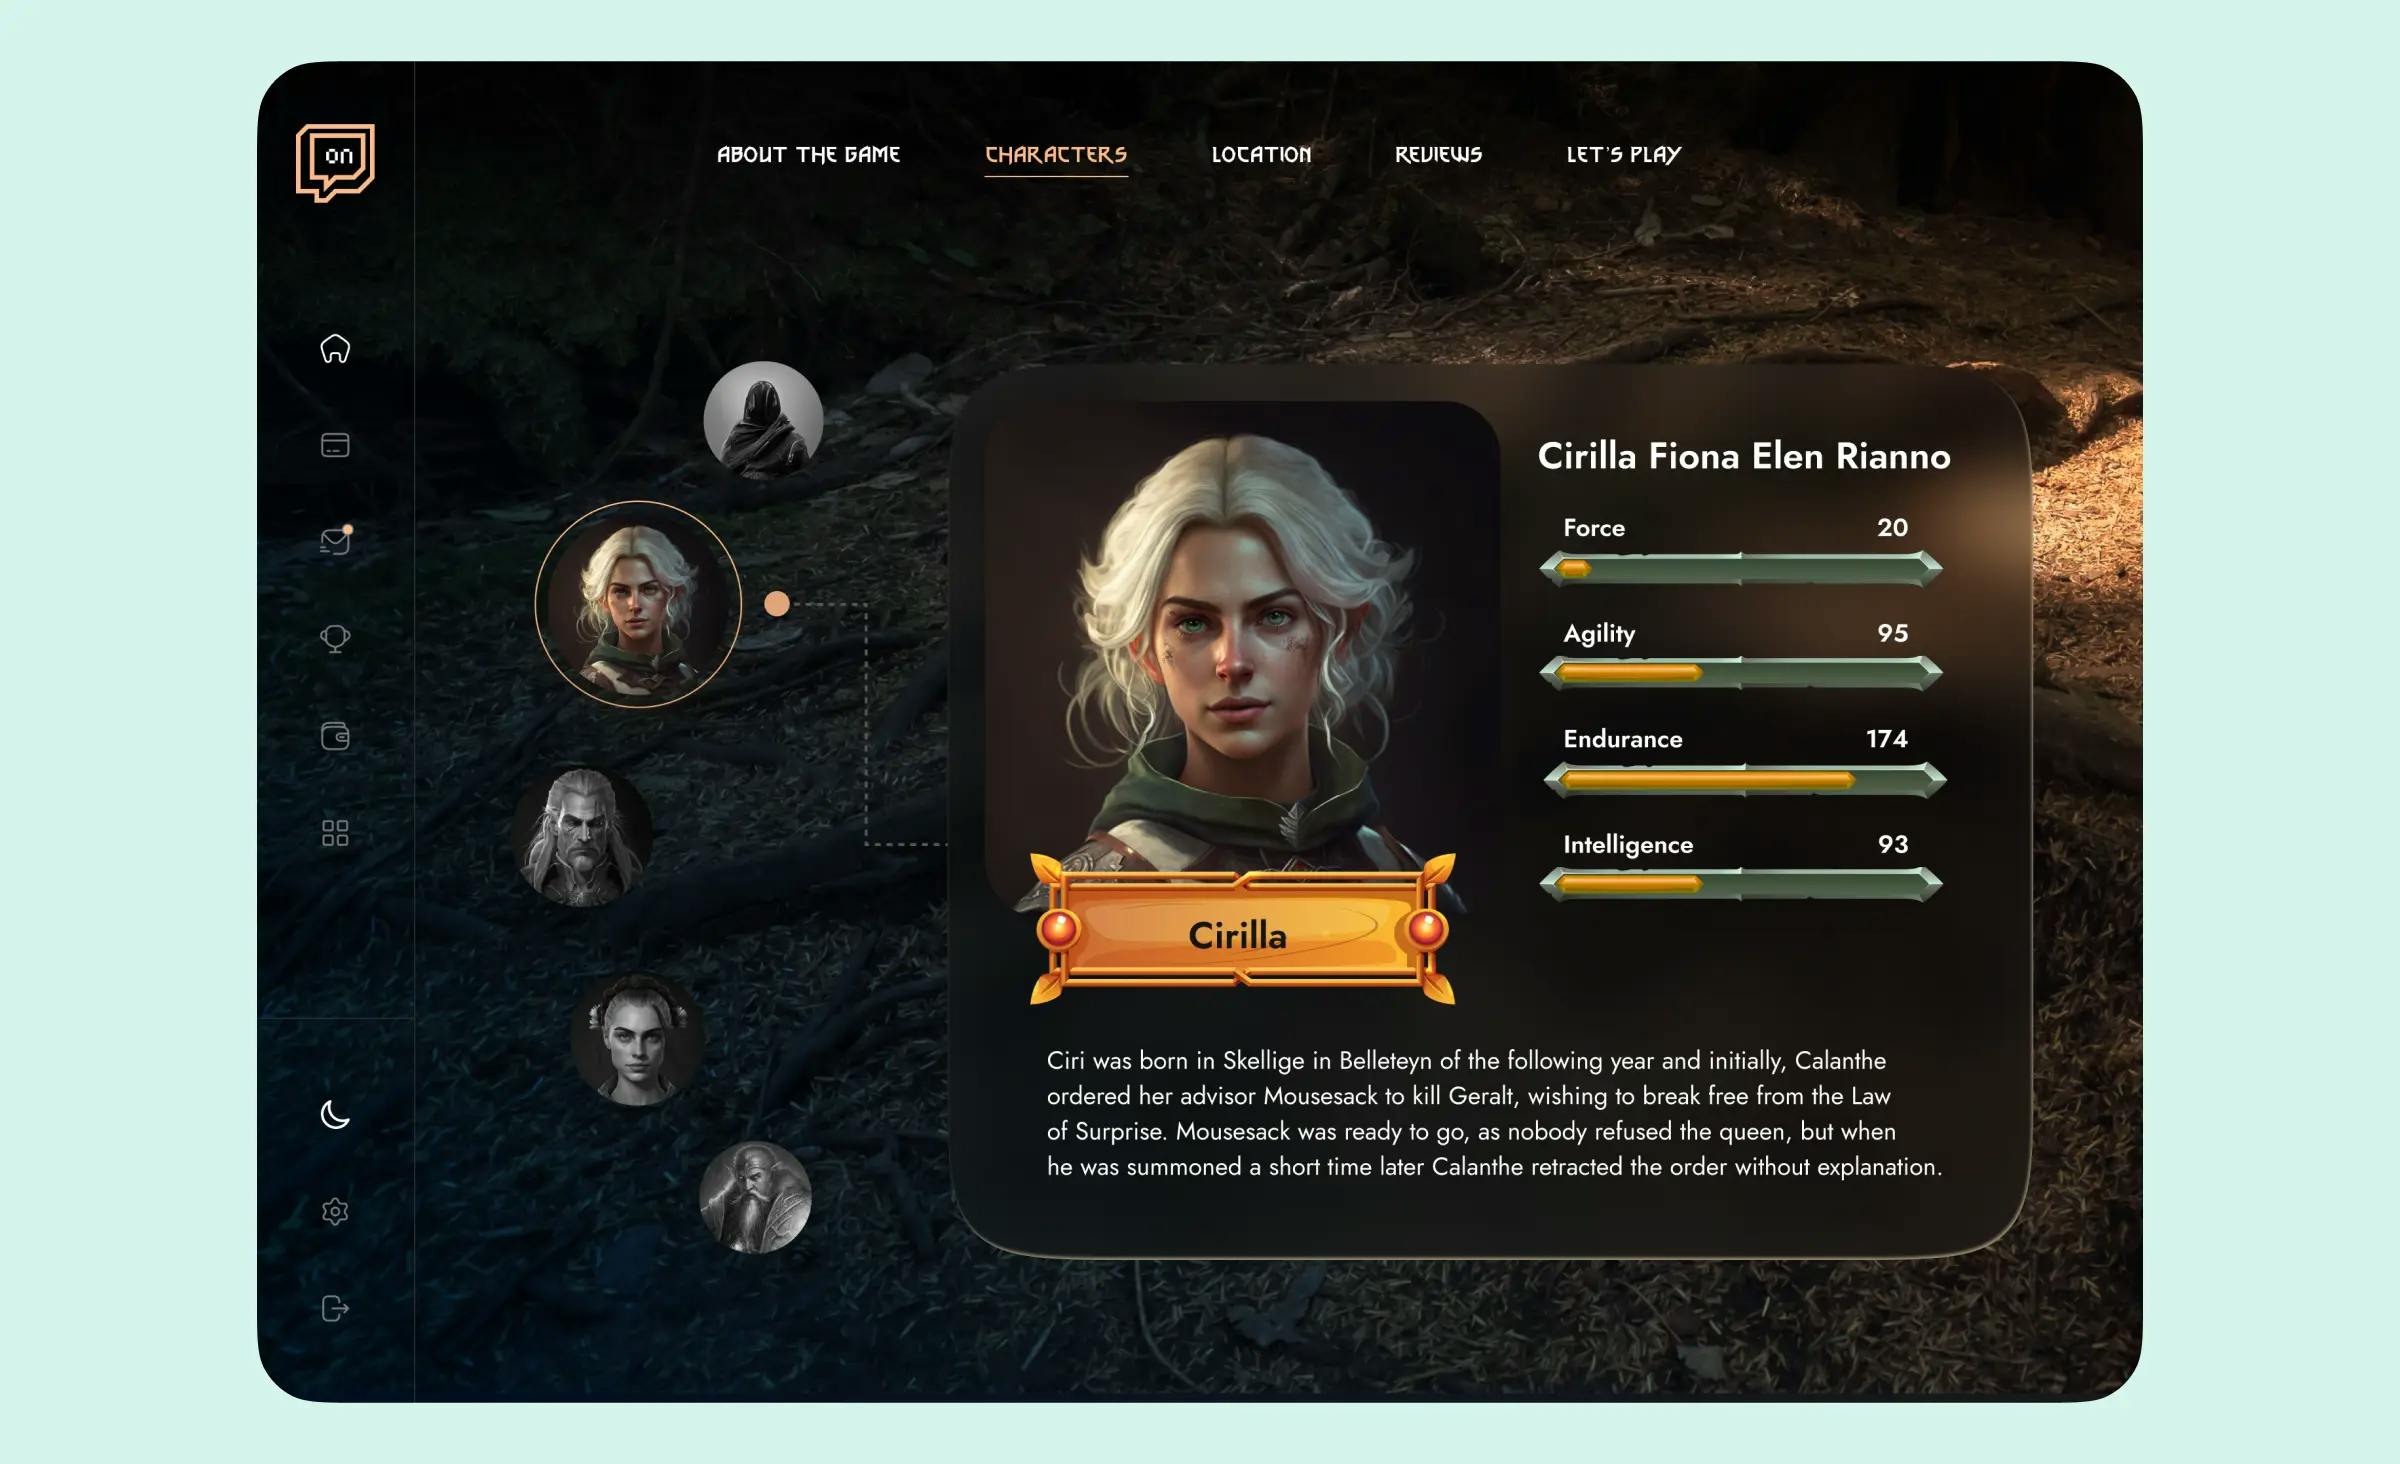 A game website design concept showcasing a Characters page. We can select a character from the left-hand side of the screen and view a brief description of them. This design concept by Ronas IT features the character Cirilla. Her profile displays progress charts for her intelligence, endurance, agility, and force. Additionally, there is a short biography below her portrait along with charts presenting her characteristics.